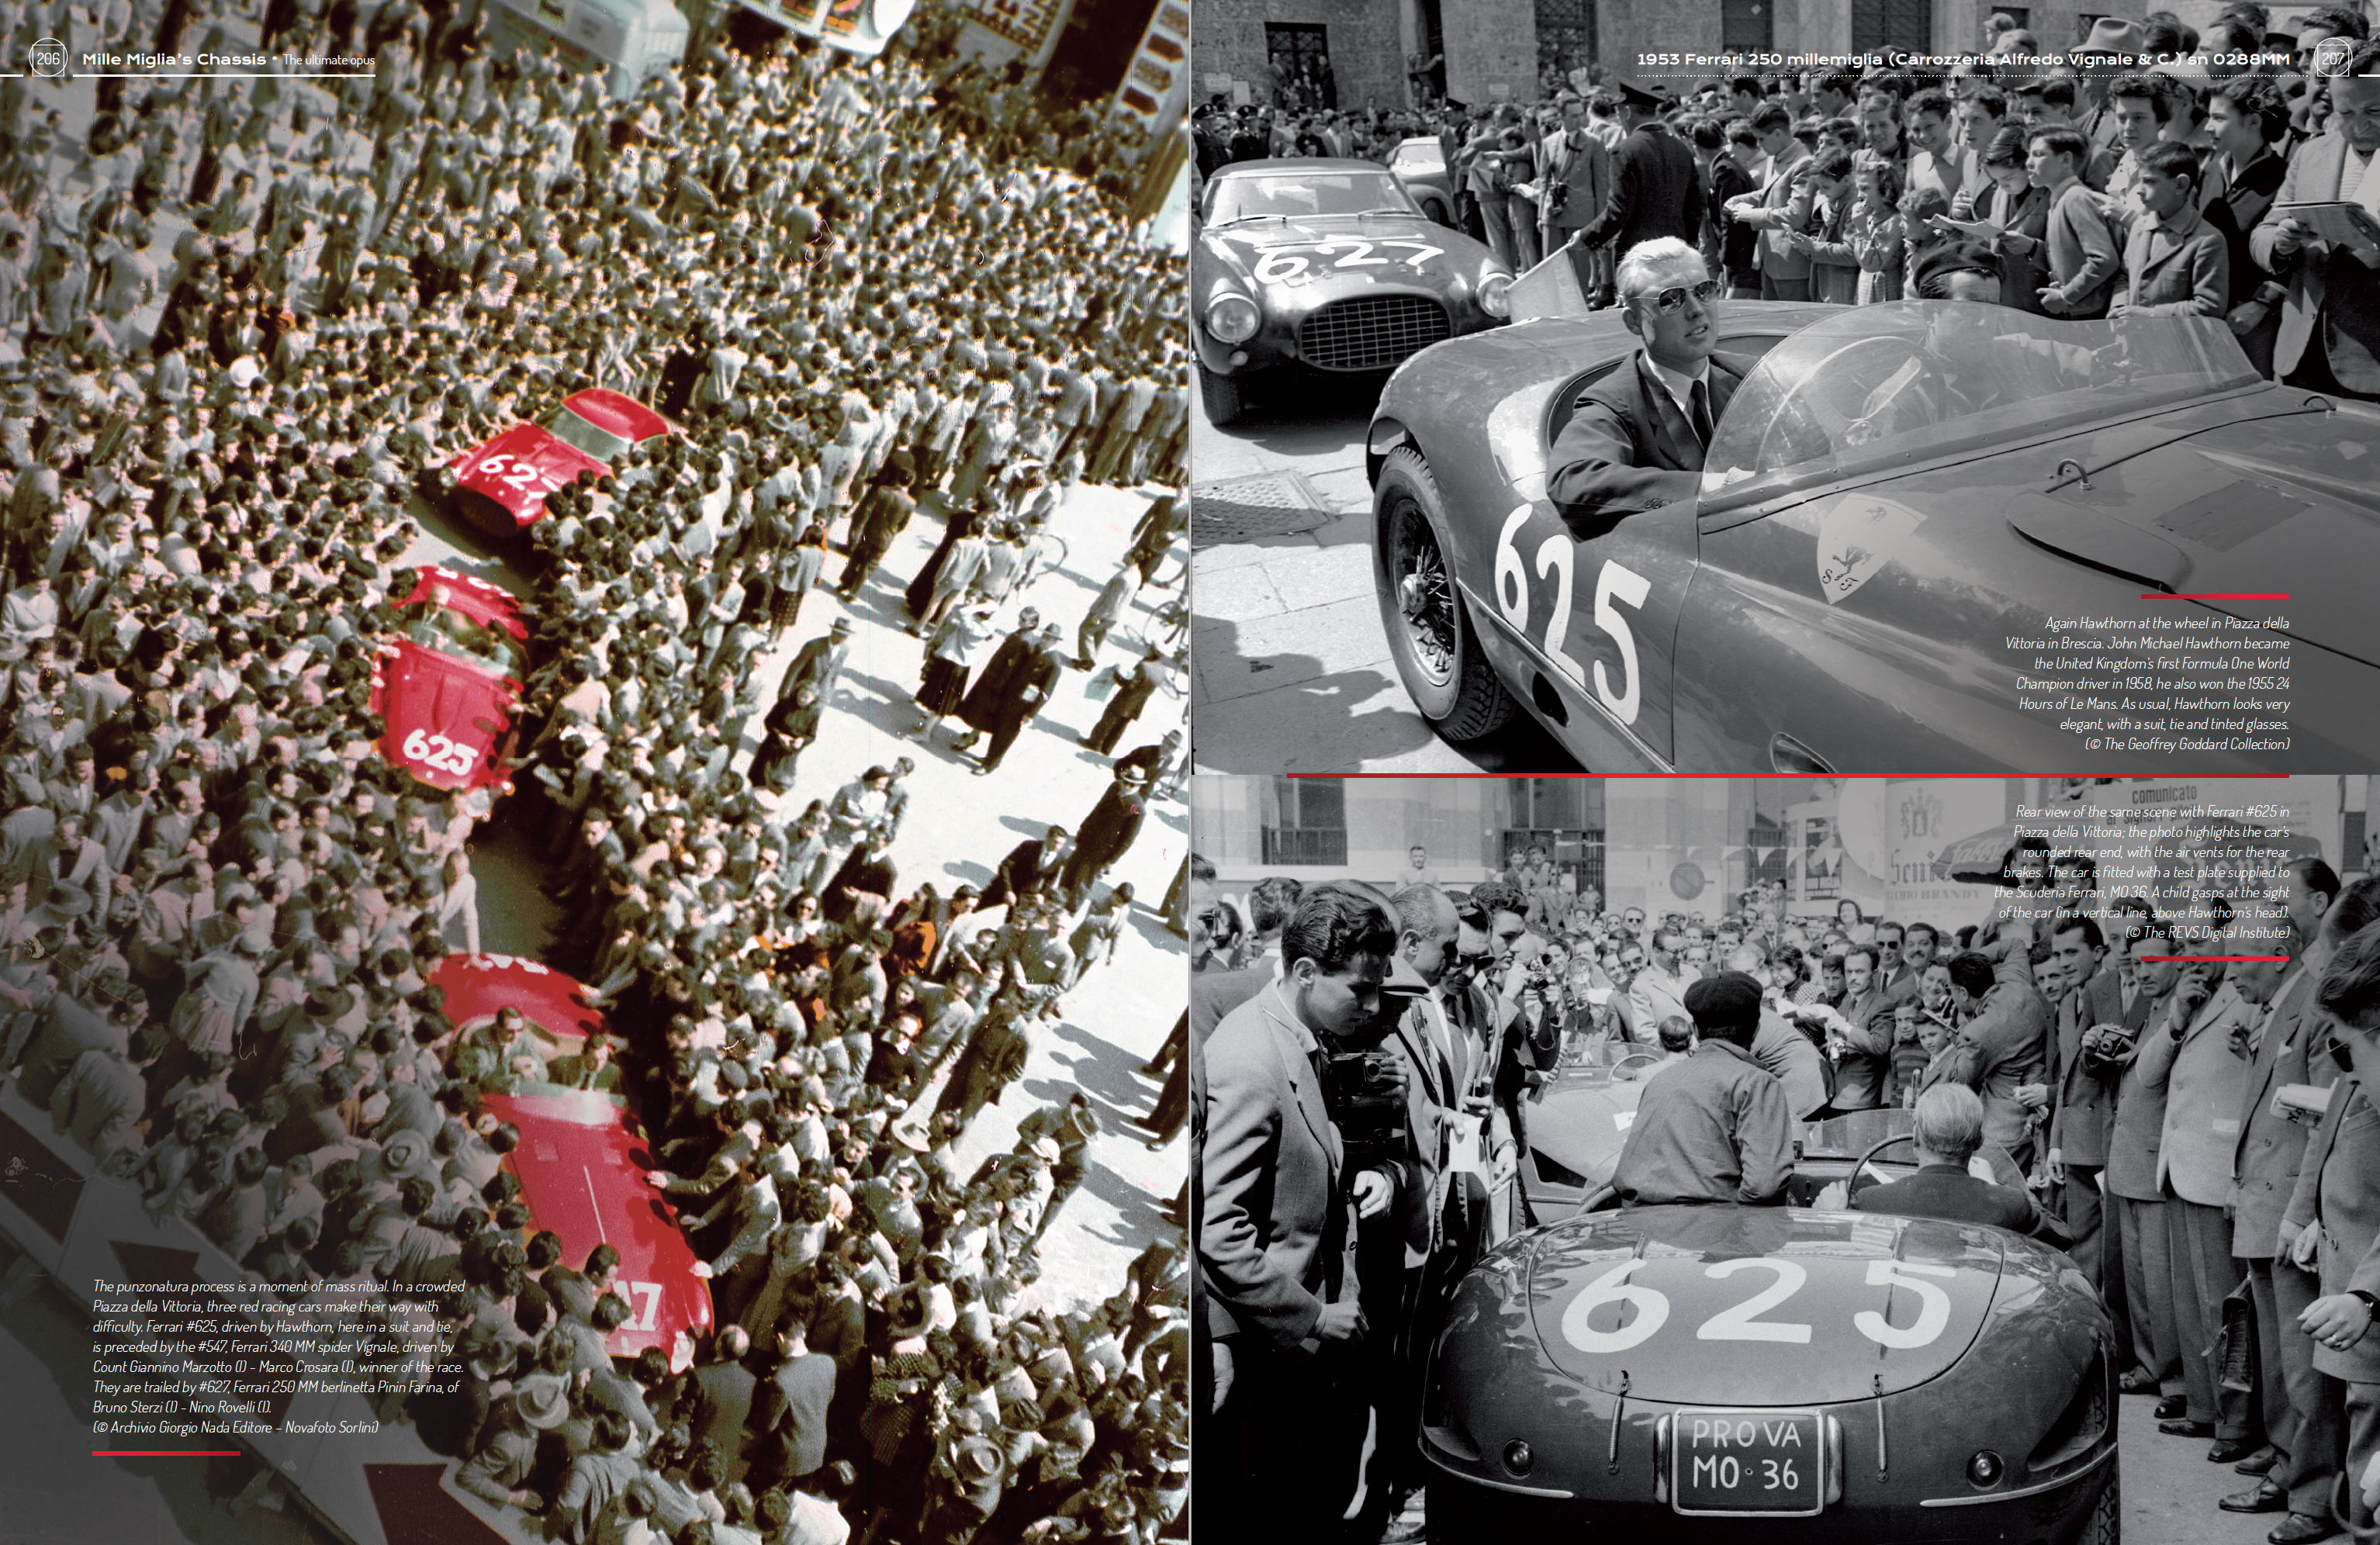 MILLE MIGLIA’S CHASSIS - Volume III